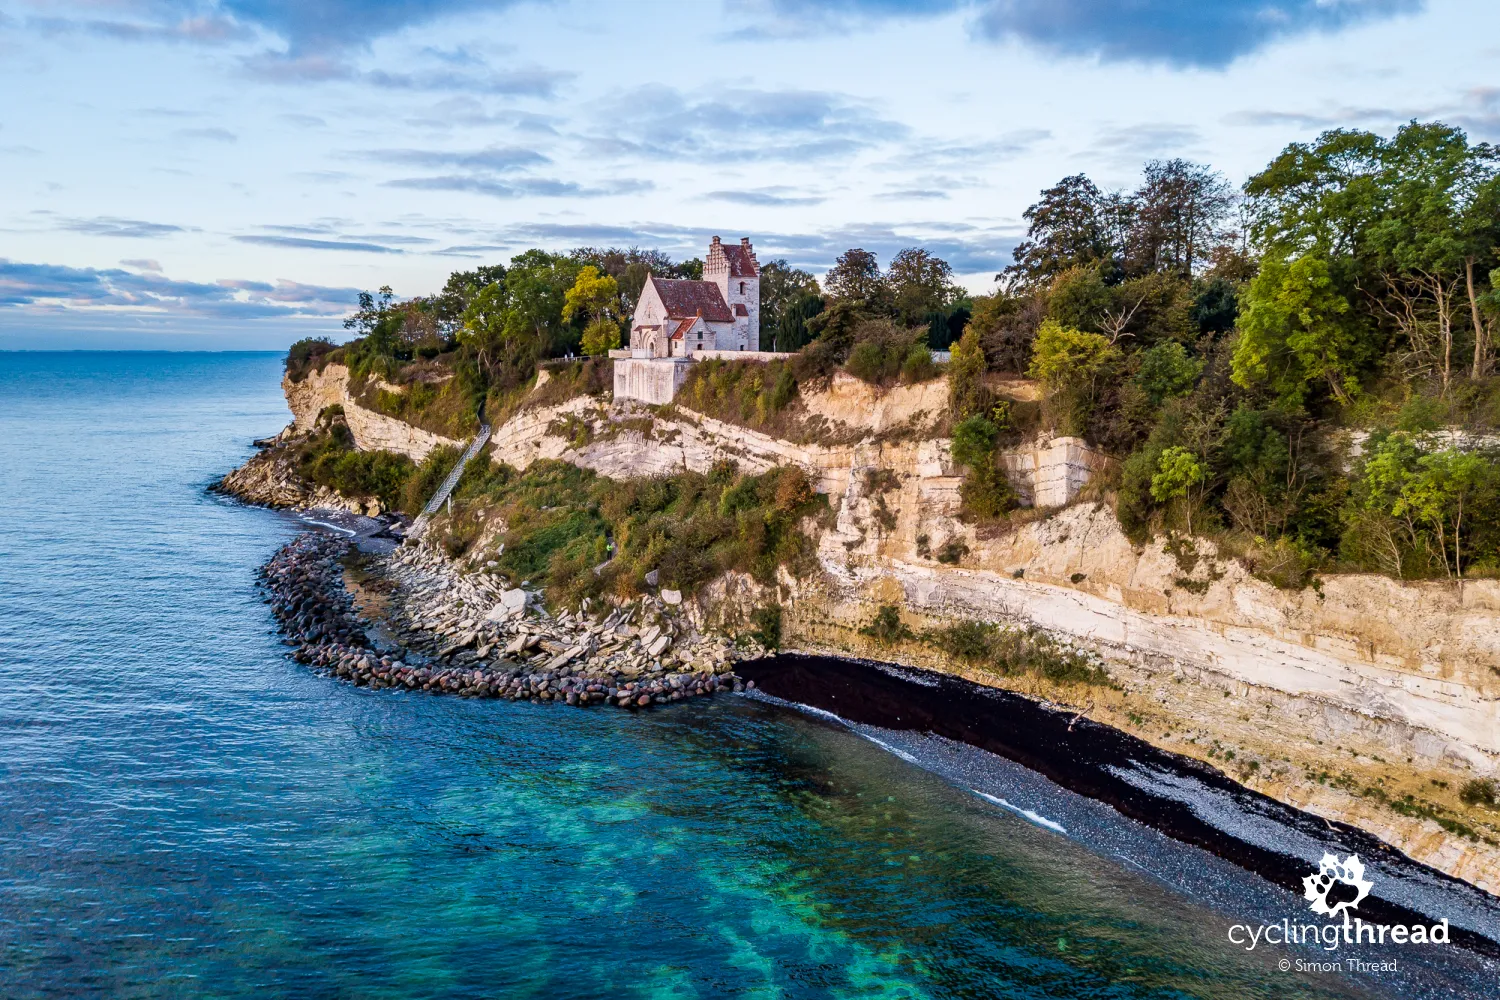 The church on the cliff at Stevns Klint in Denmark